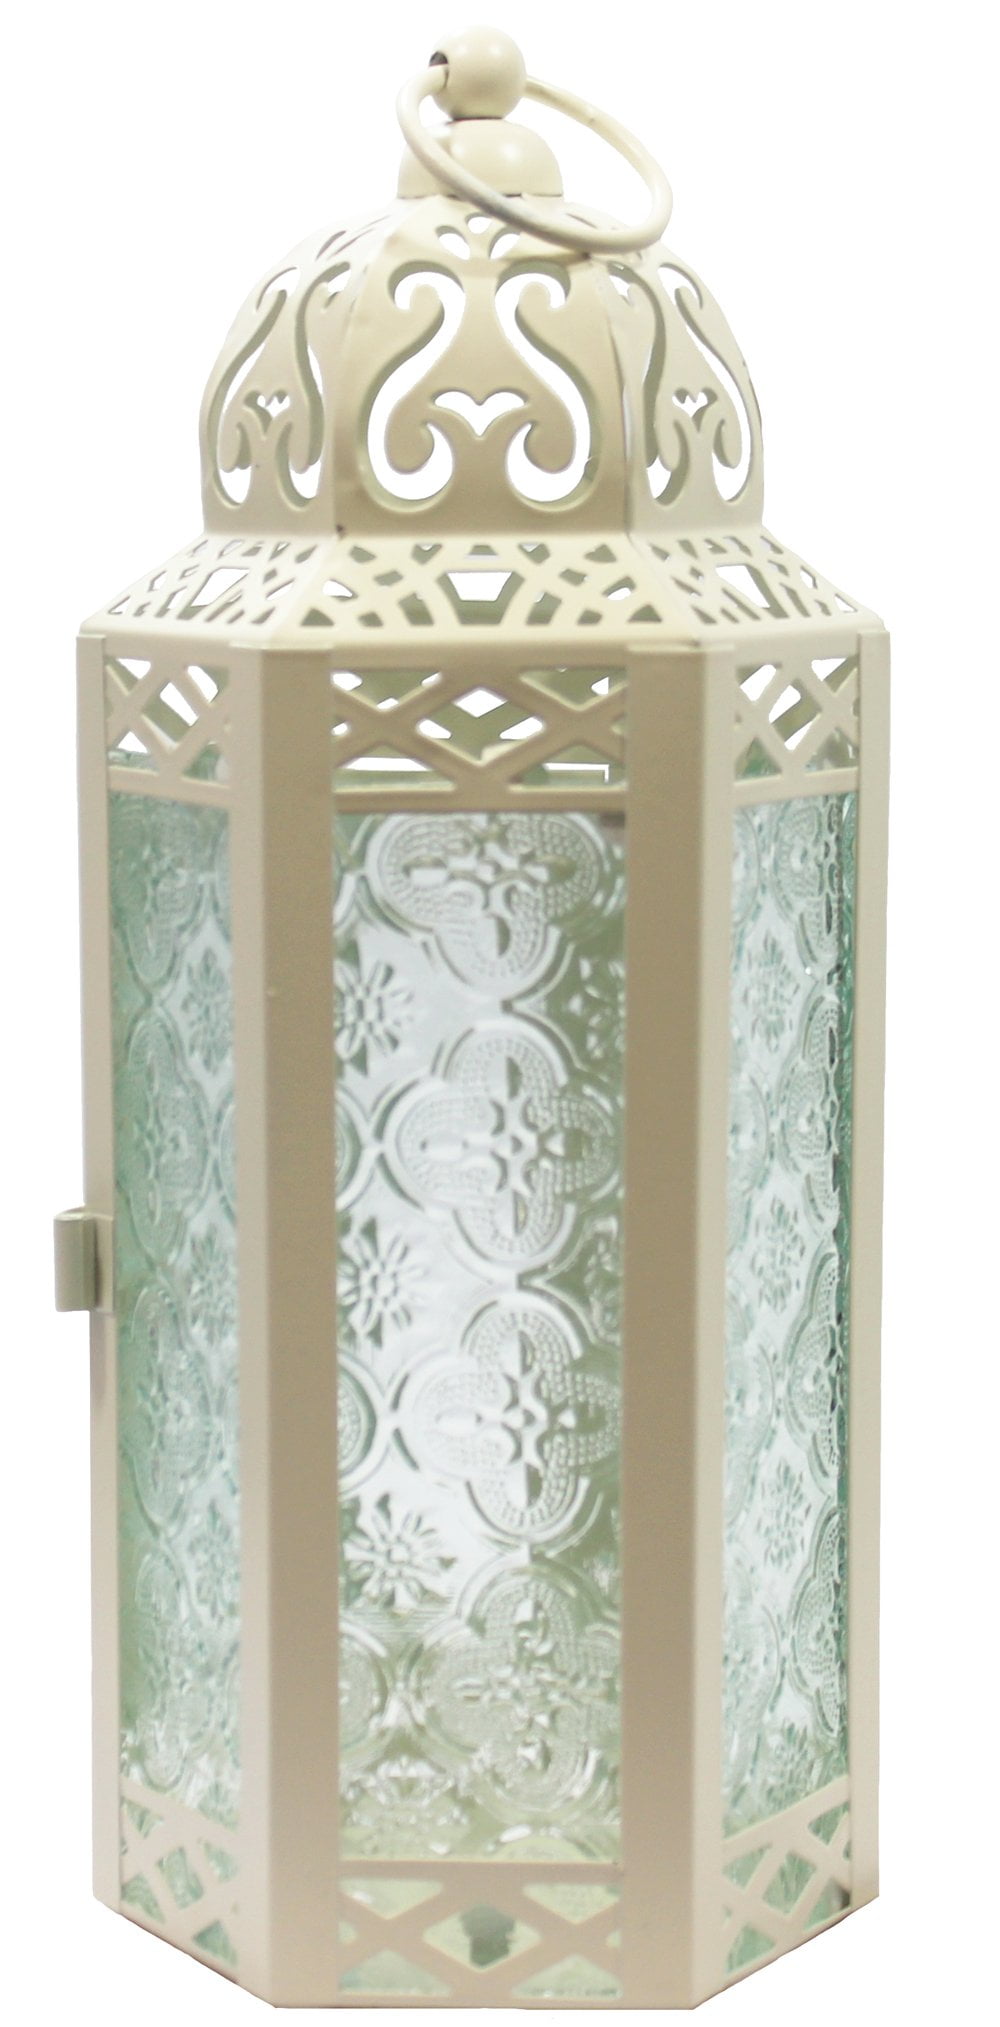 10 Large White Moroccan Candle Lantern 15” Tall Wedding Centerpieces 38466 for sale online 